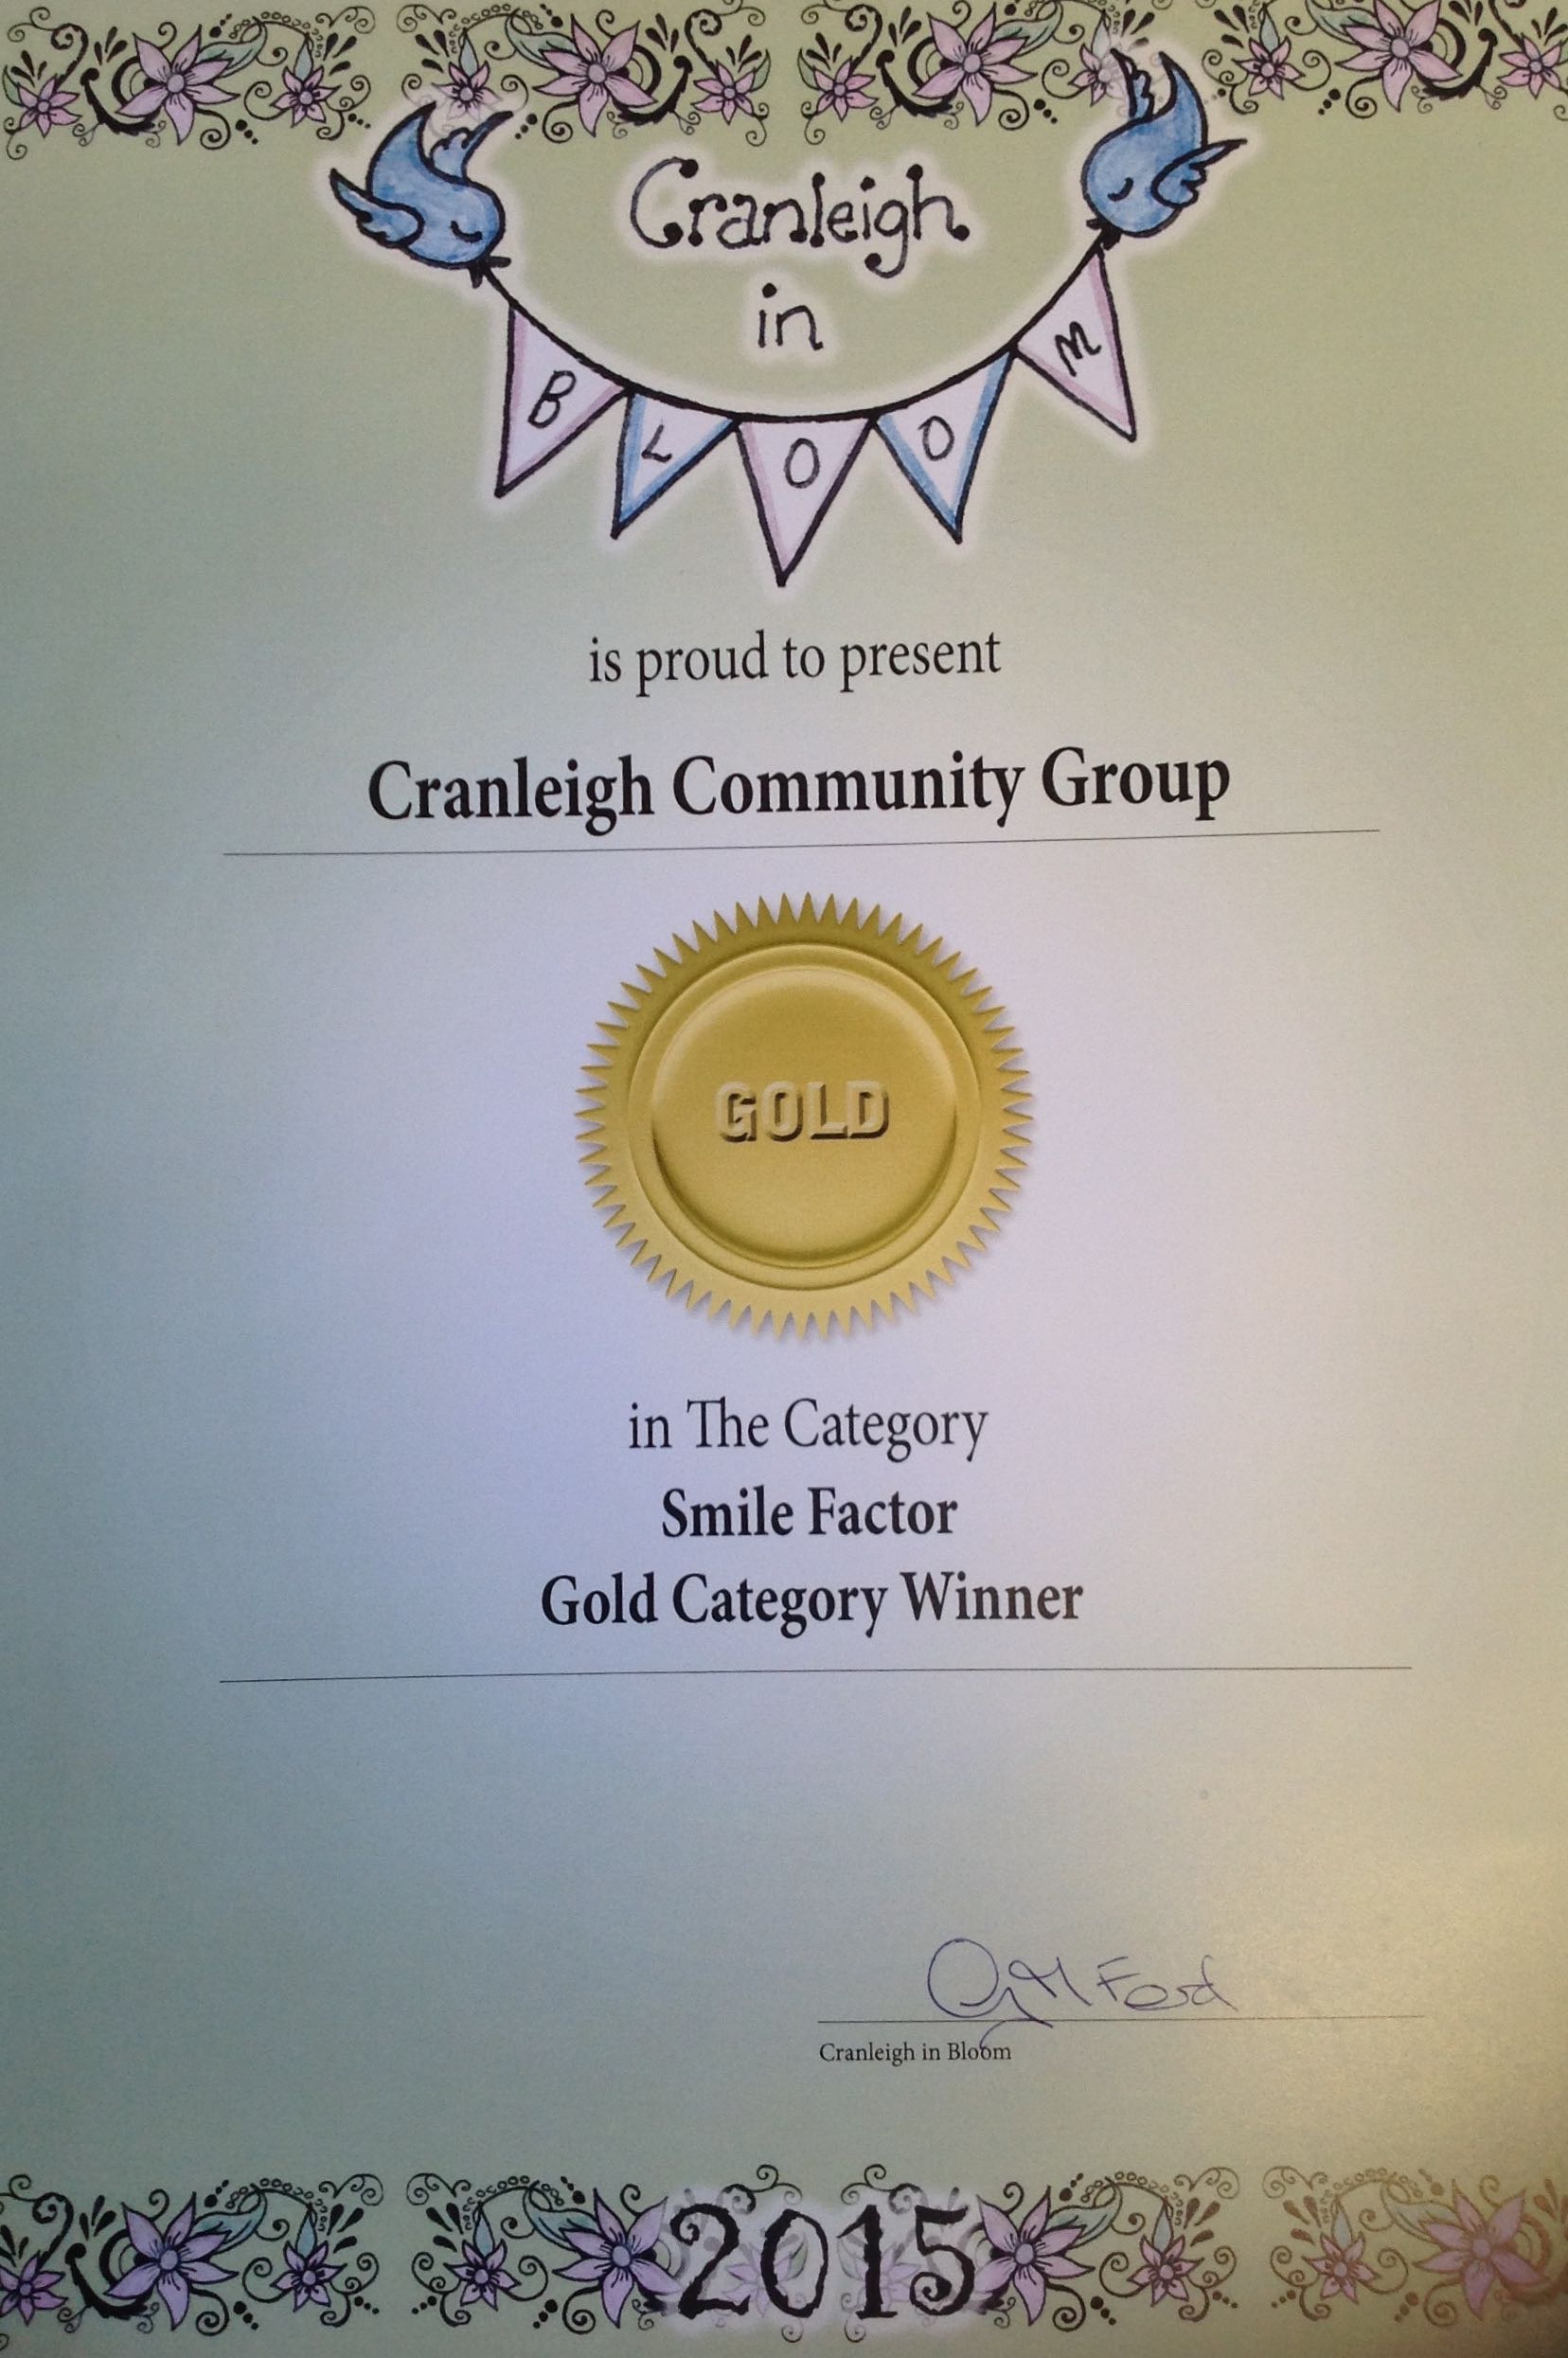 Certificate of achievement that was awarded to the Cranleigh Community Group for Gold in the category of 'Smile Factor'